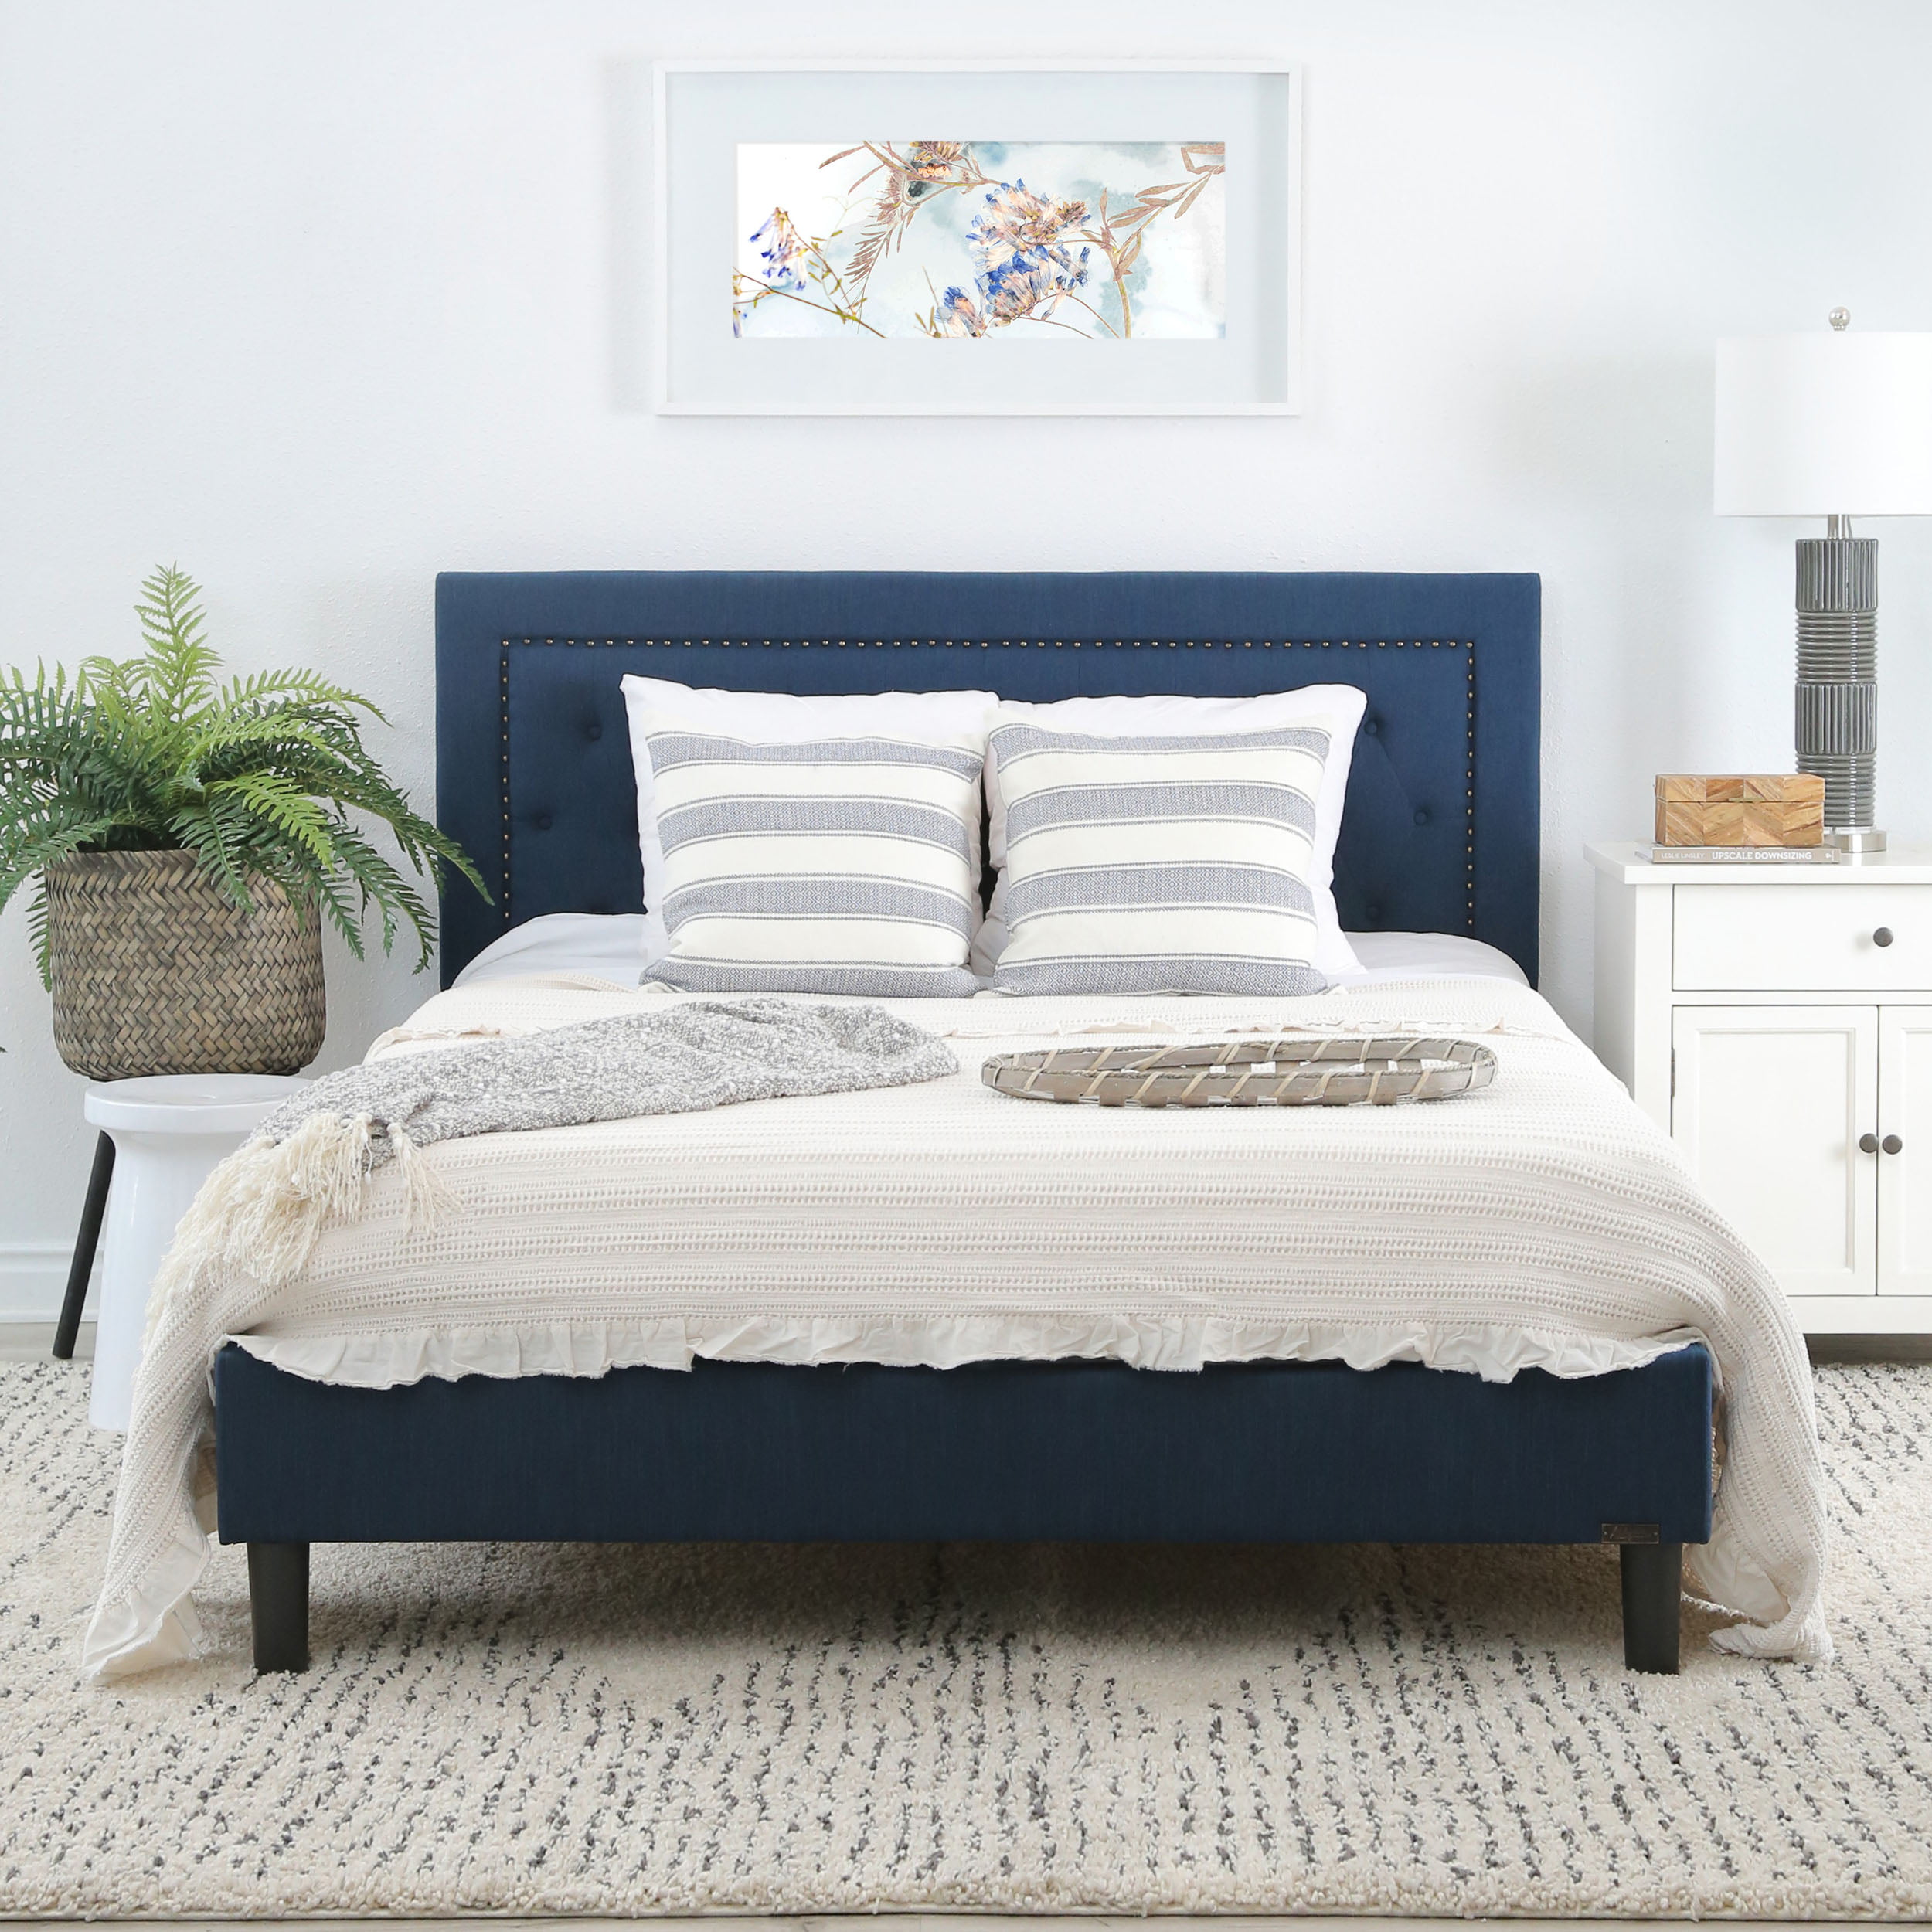 Devon & Claire Kelly Navy Blue Tufted Upholstered Bed, King - Walmart